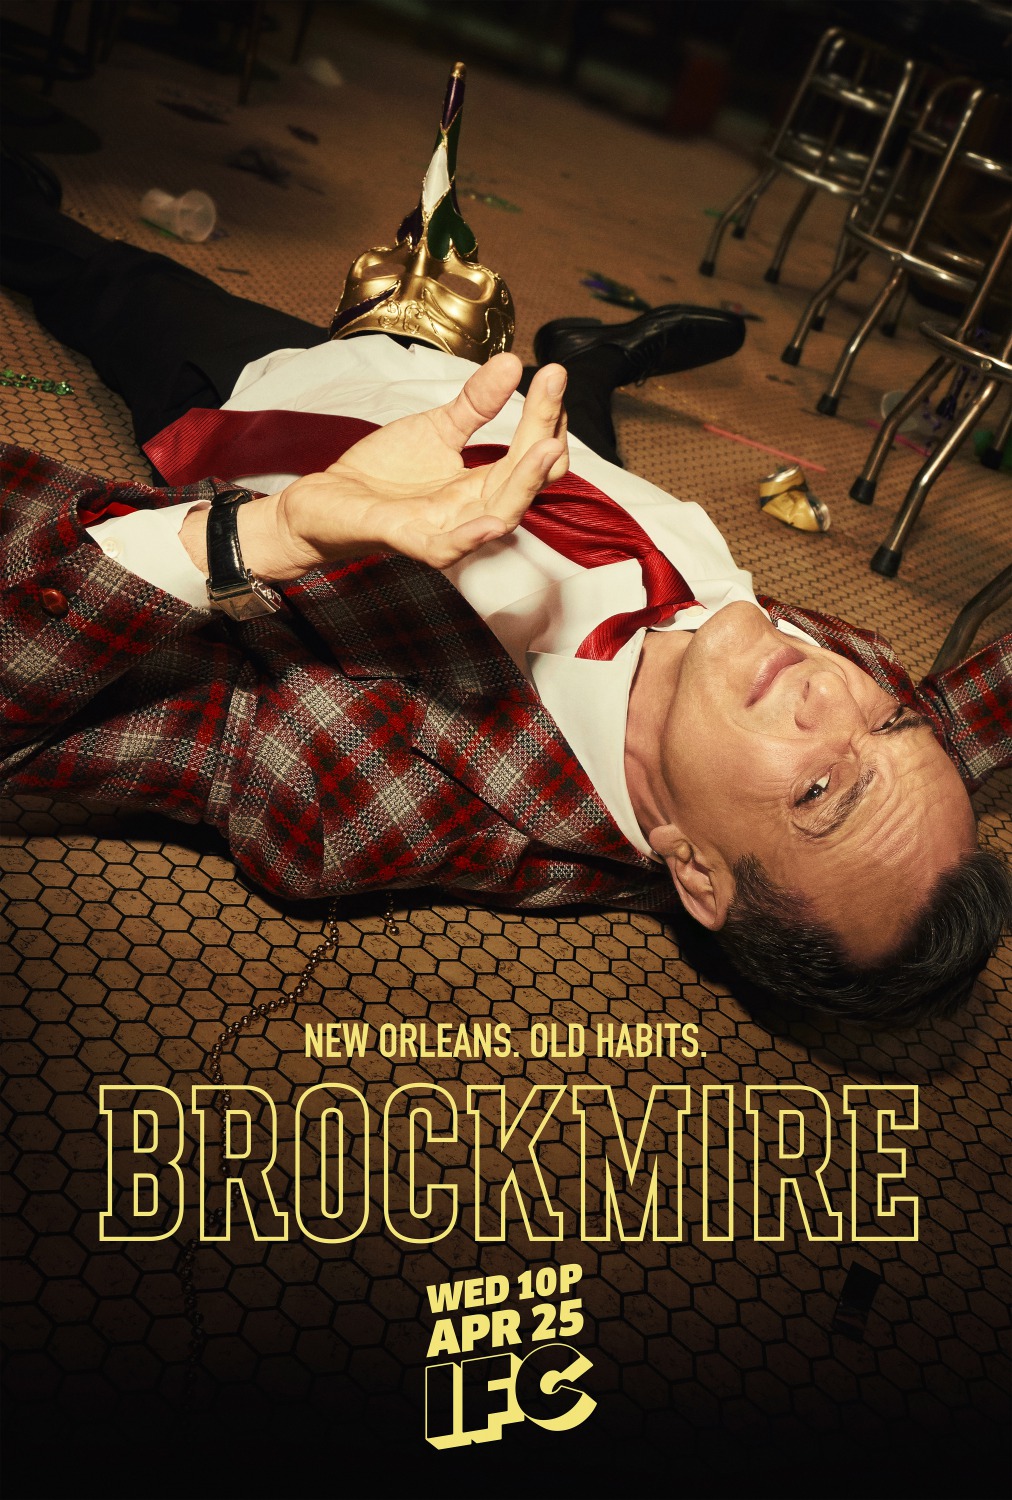 Extra Large TV Poster Image for Brockmire (#5 of 8)